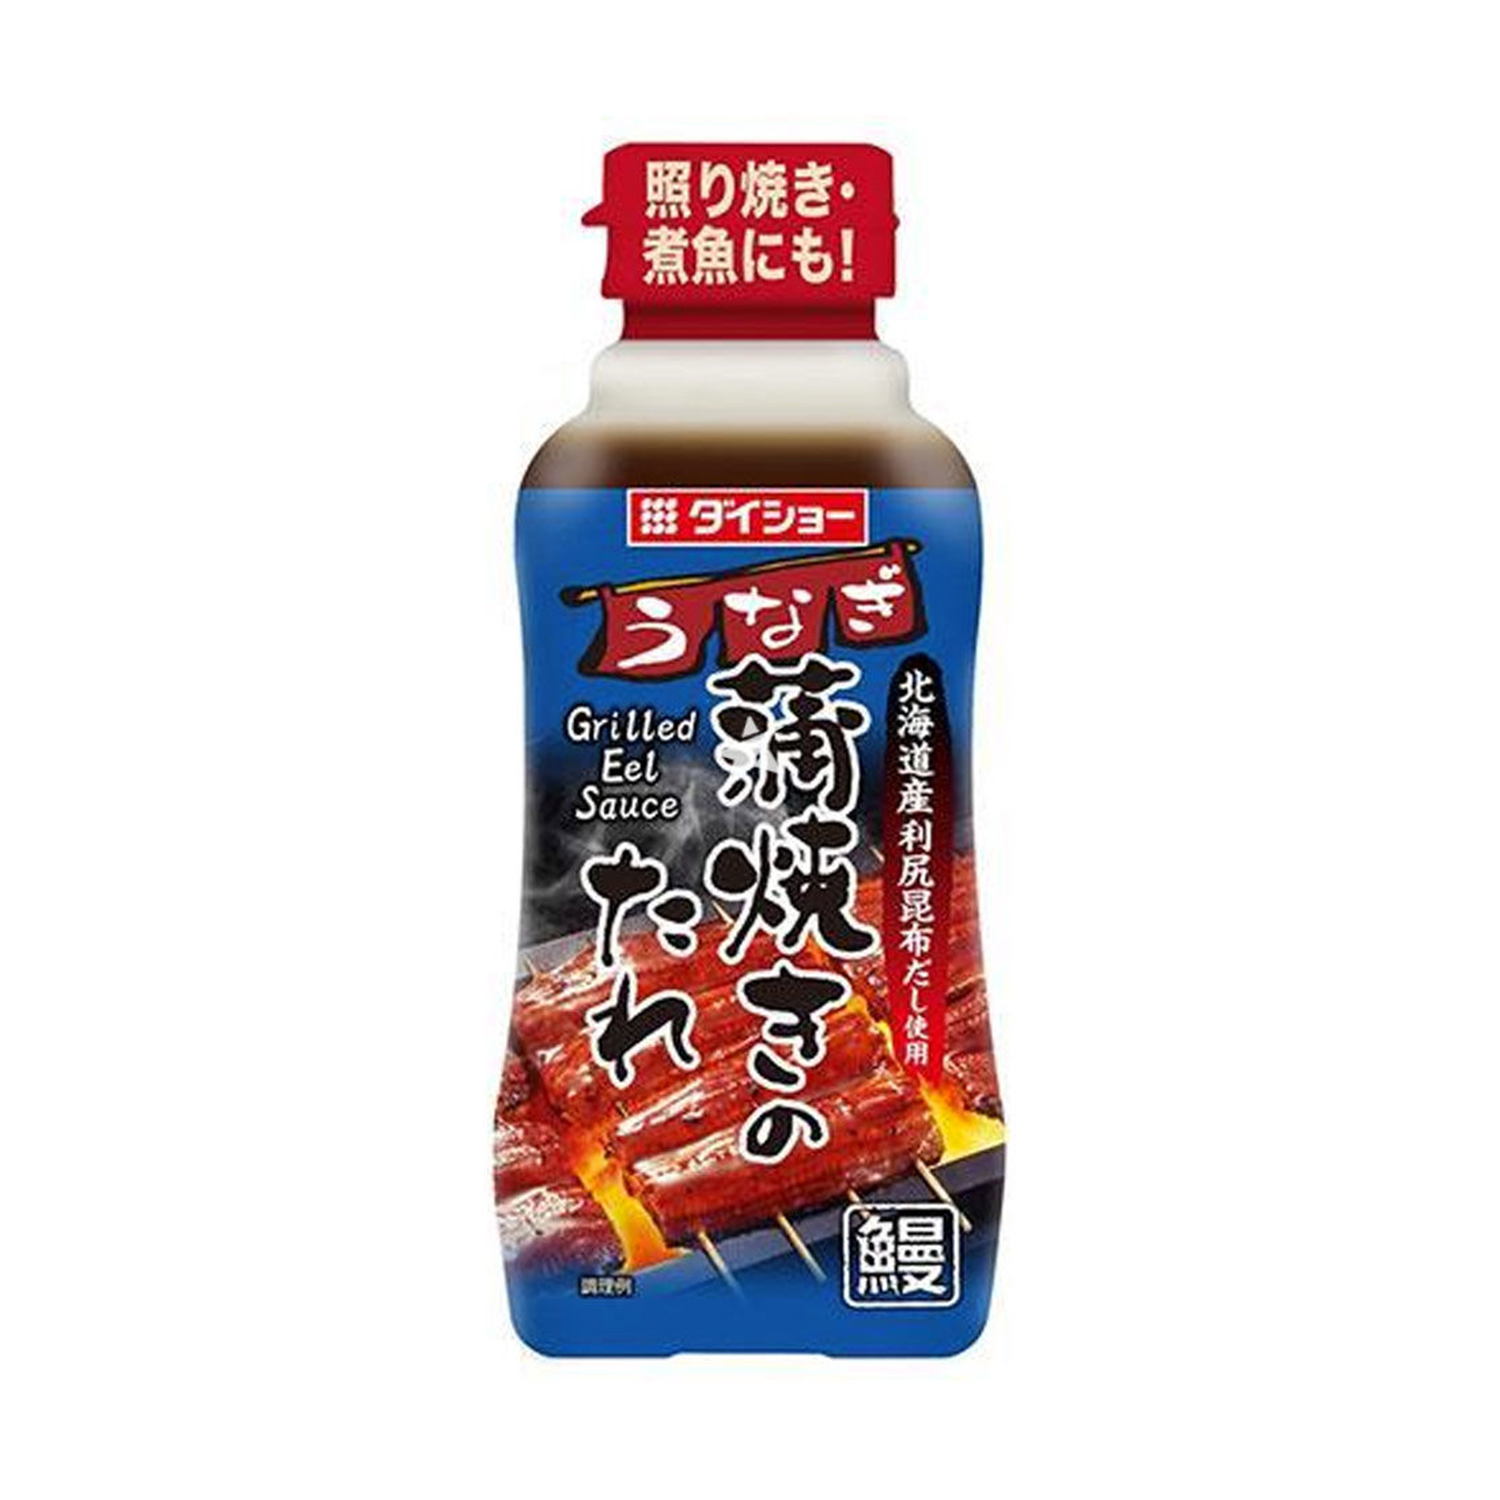 Daisho Grilled Eel Sauce 240g-eBest-Cooking Sauce & Recipe Bases,Pantry